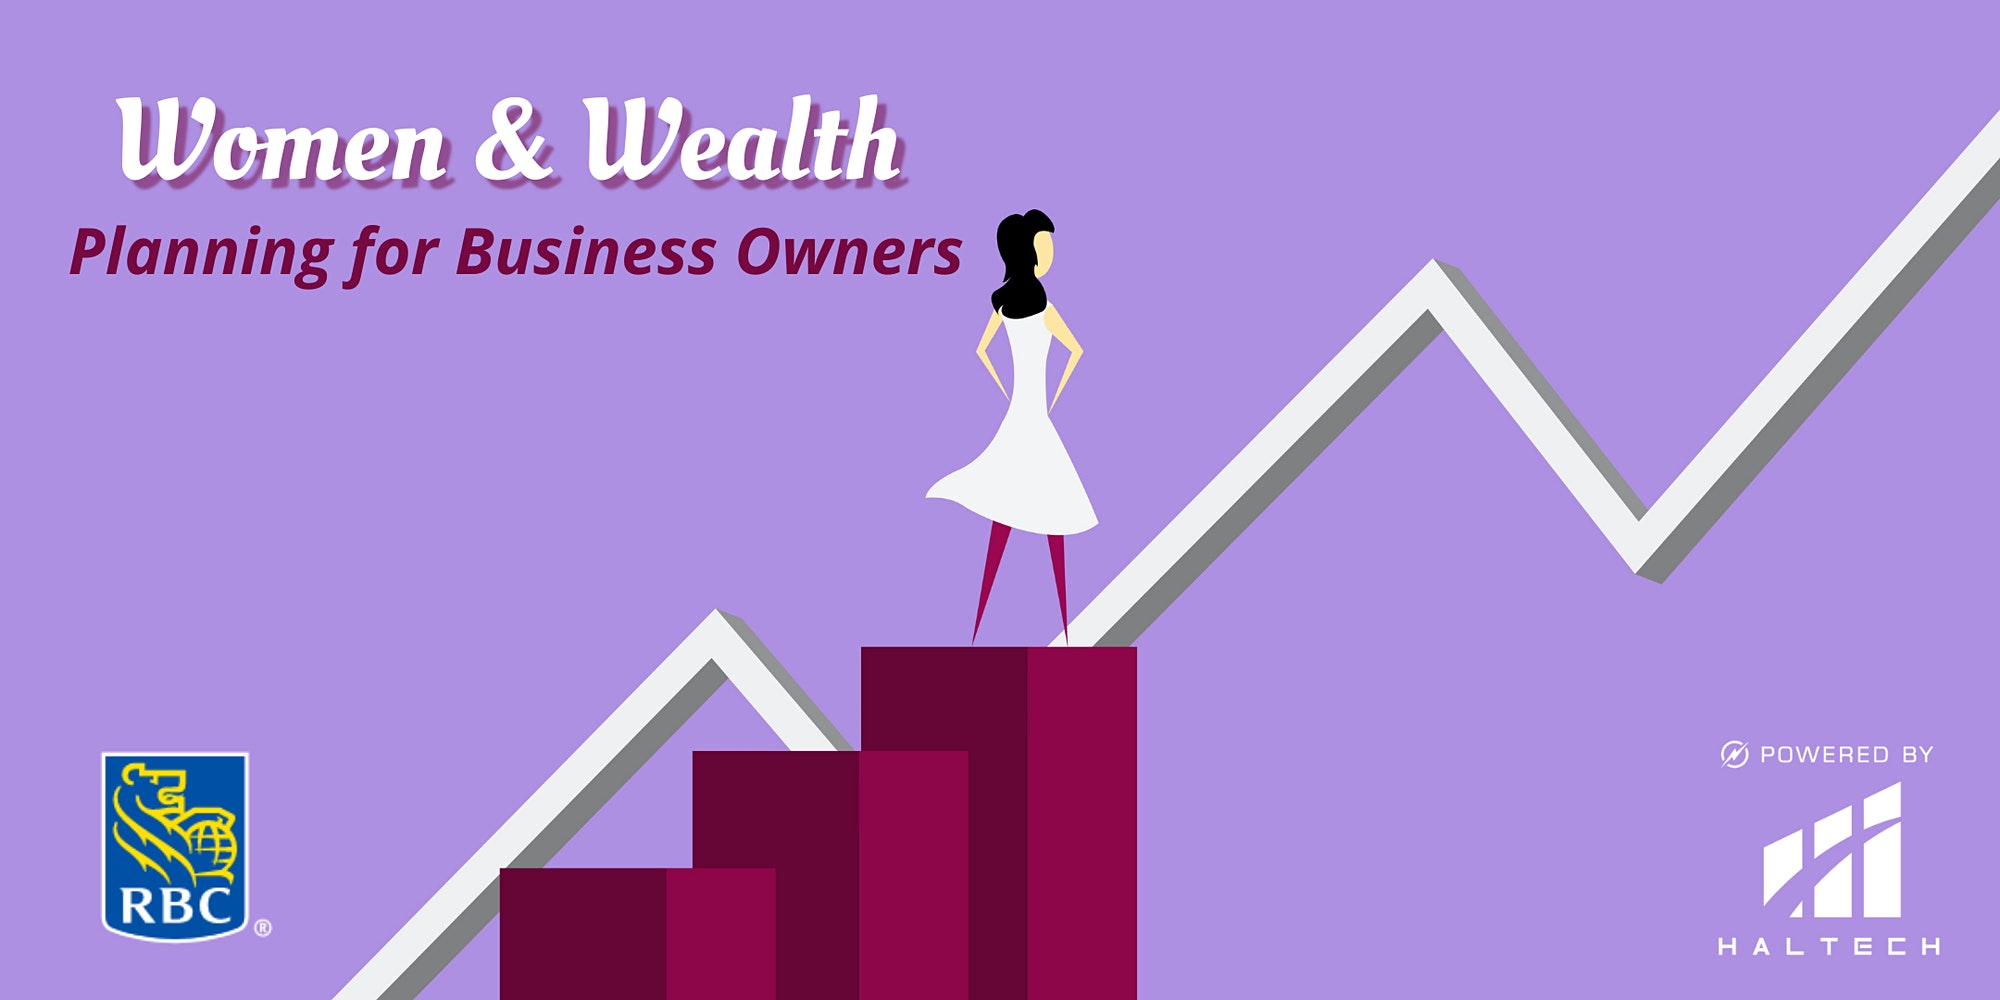 Women & Wealth: Planning for Business Owners - Haltech